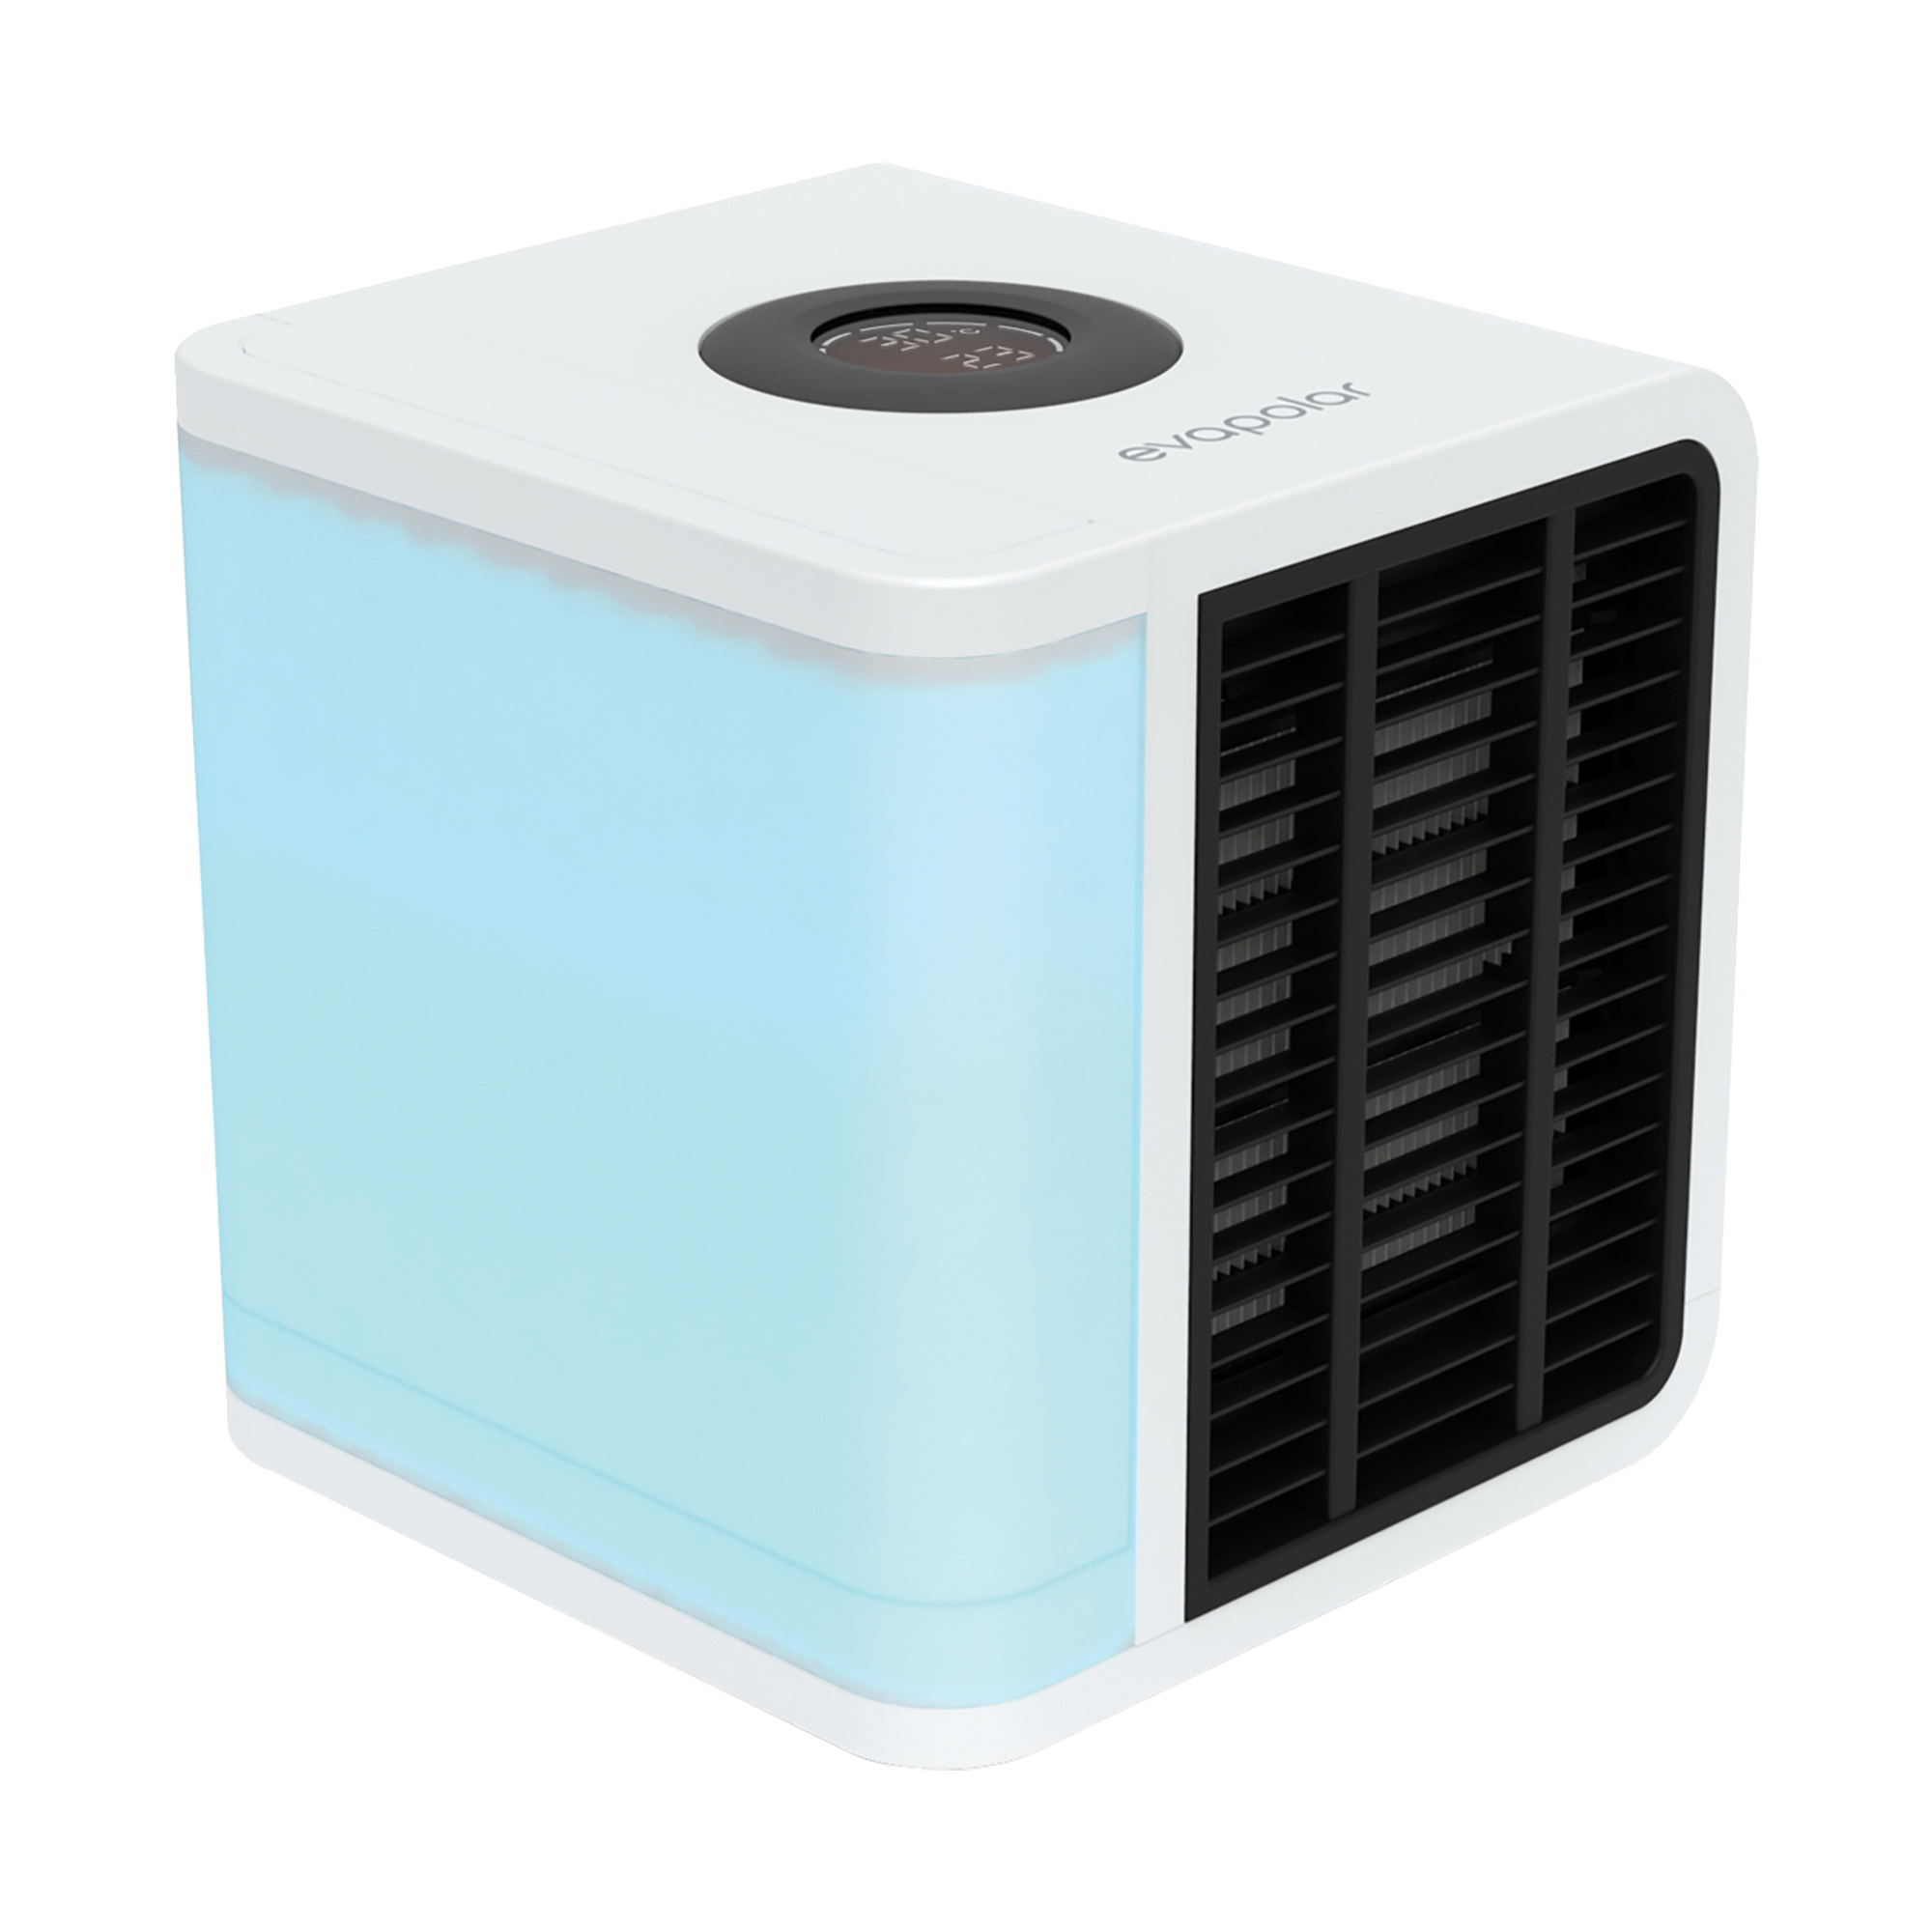 Evapolar, evaLIGHTplus Personal Air Cooler Humidifier, Air Delivery 49 cfm, Model EVPEV1500W